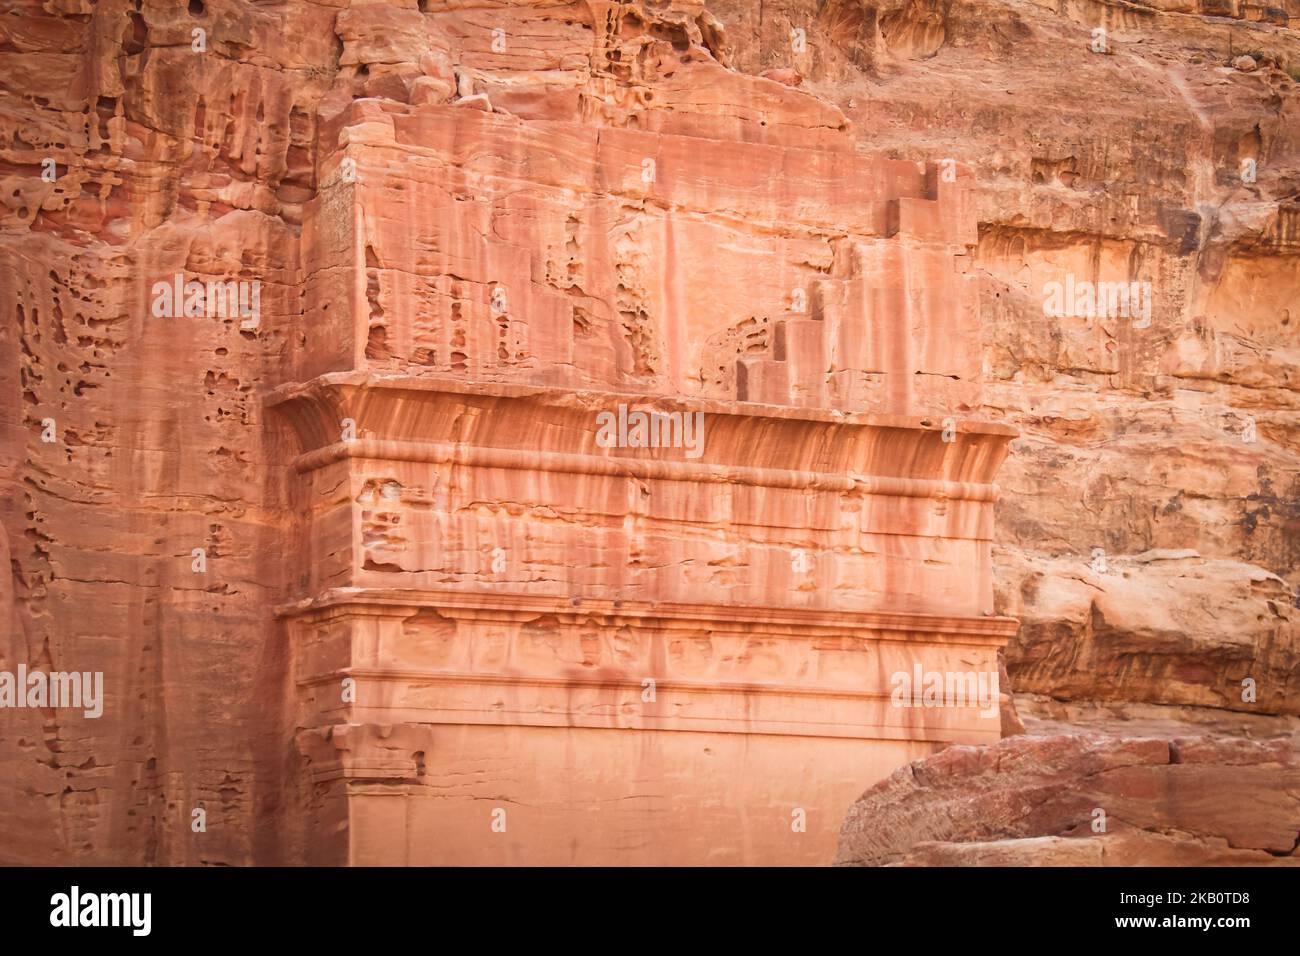 Famous Royal tombs in ancient city of Petra, Jordan. It is know as the Loculi. Petra has led to its designation as UNESCO World Heritage Site. Stock Photo